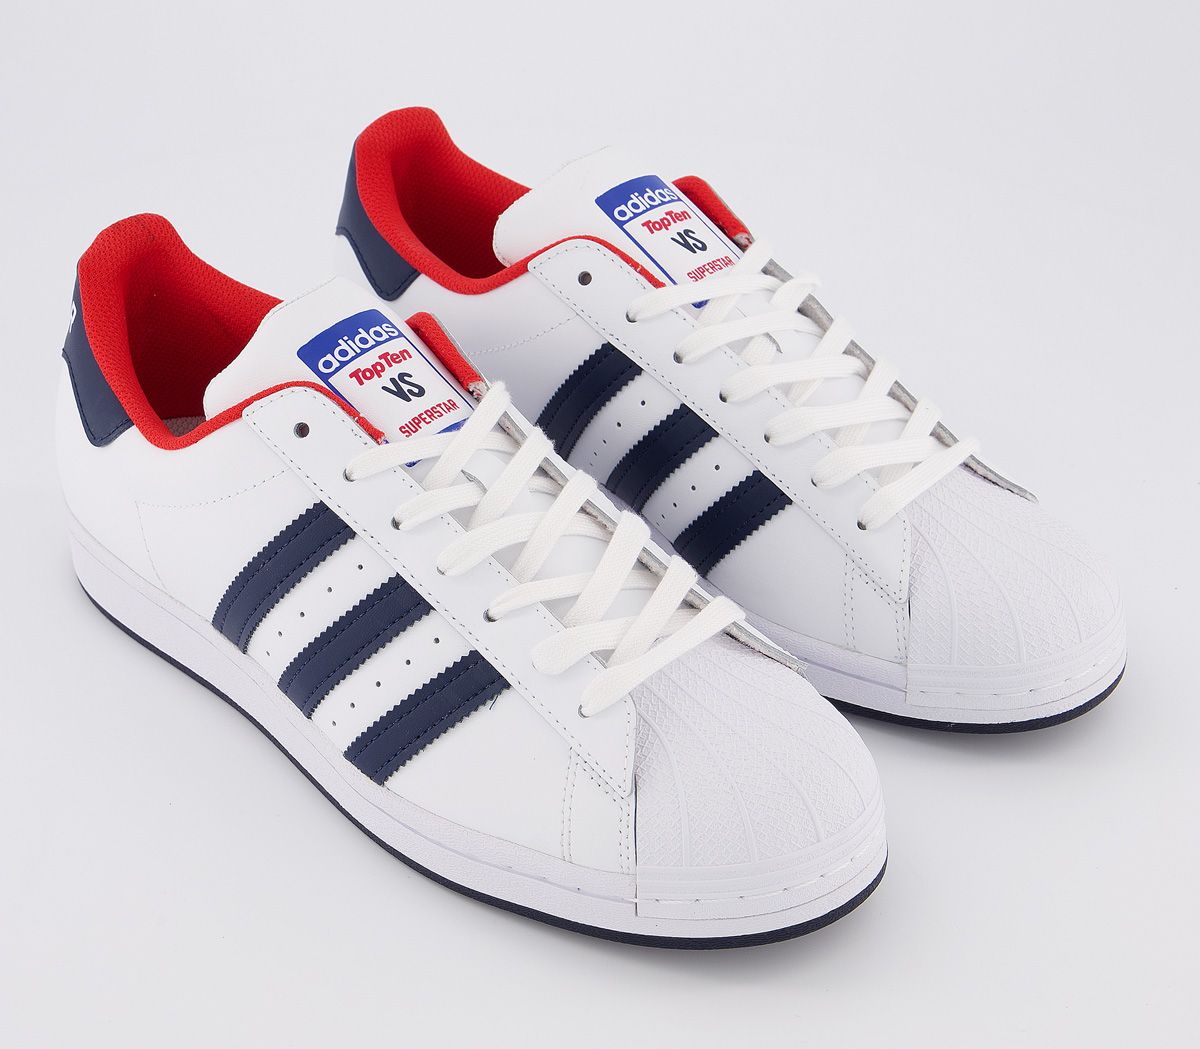 adidas Superstar Trainers White Navy Red - Hers trainers